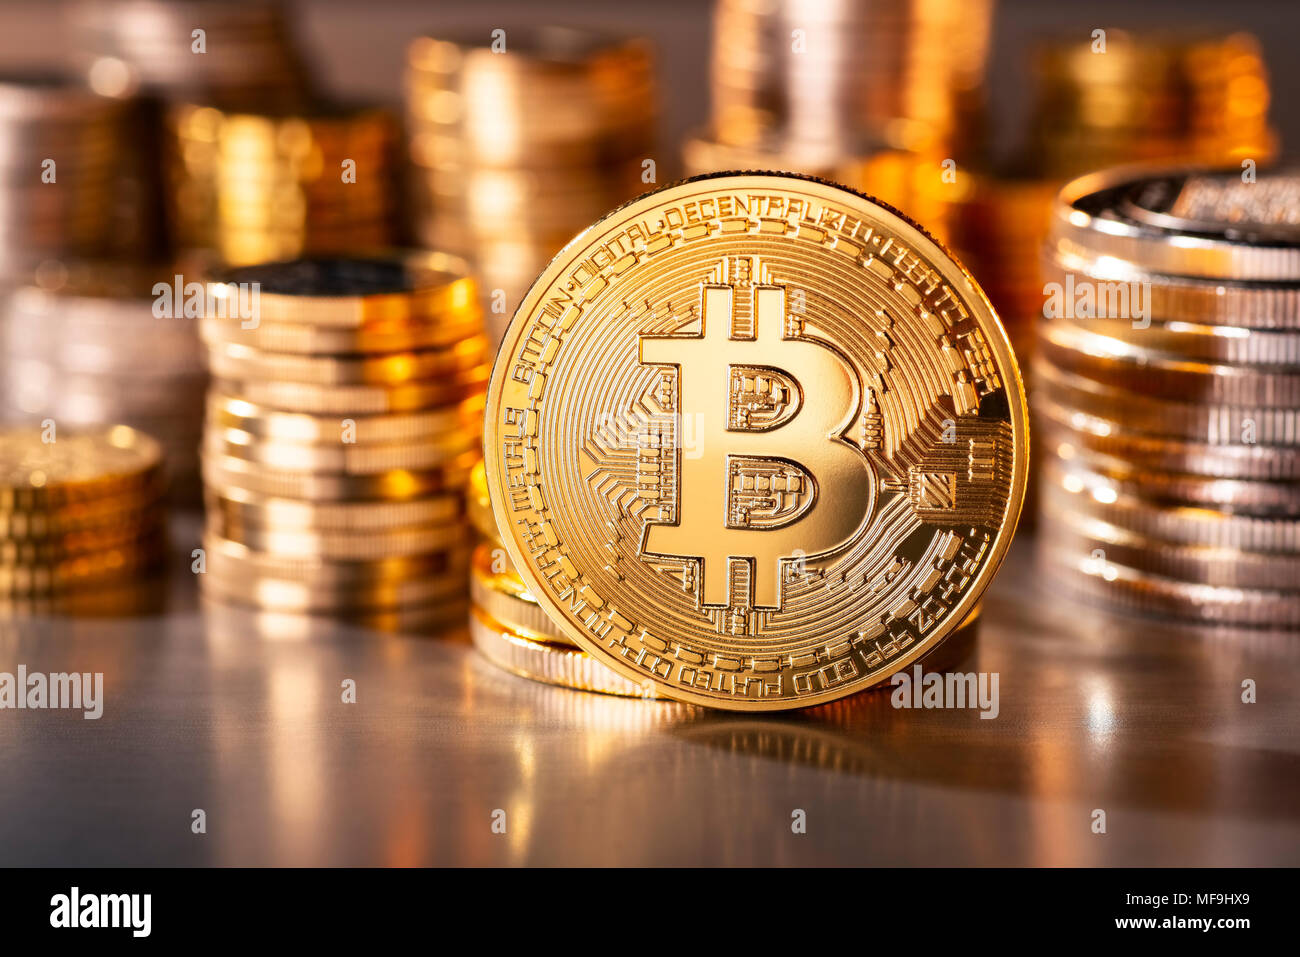 Coin of the crypto-currency Bitcoin with several stacks of coins in the background Stock Photo